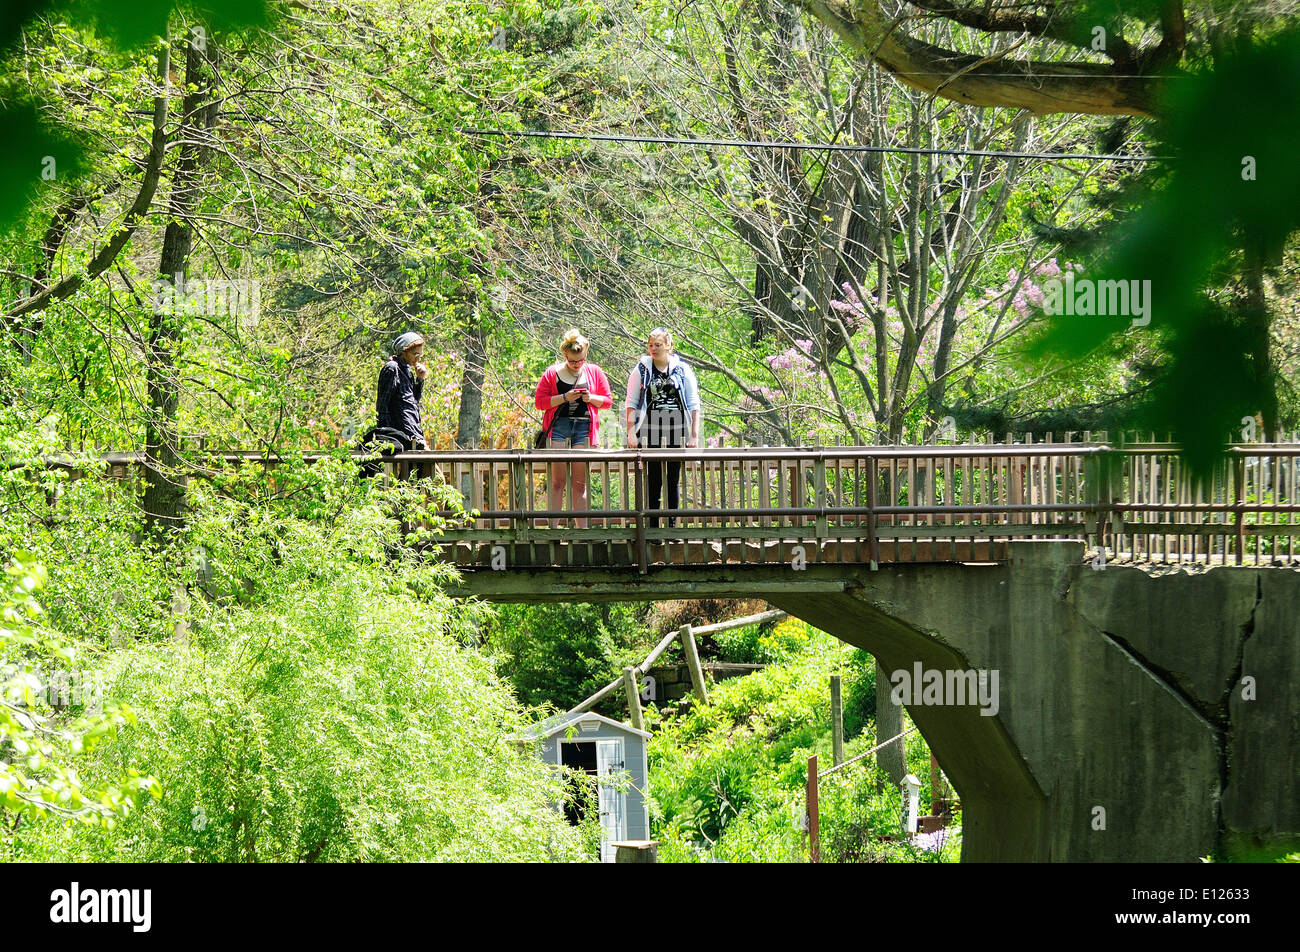 3 People standing on island bridge observing river channel. Stock Photo